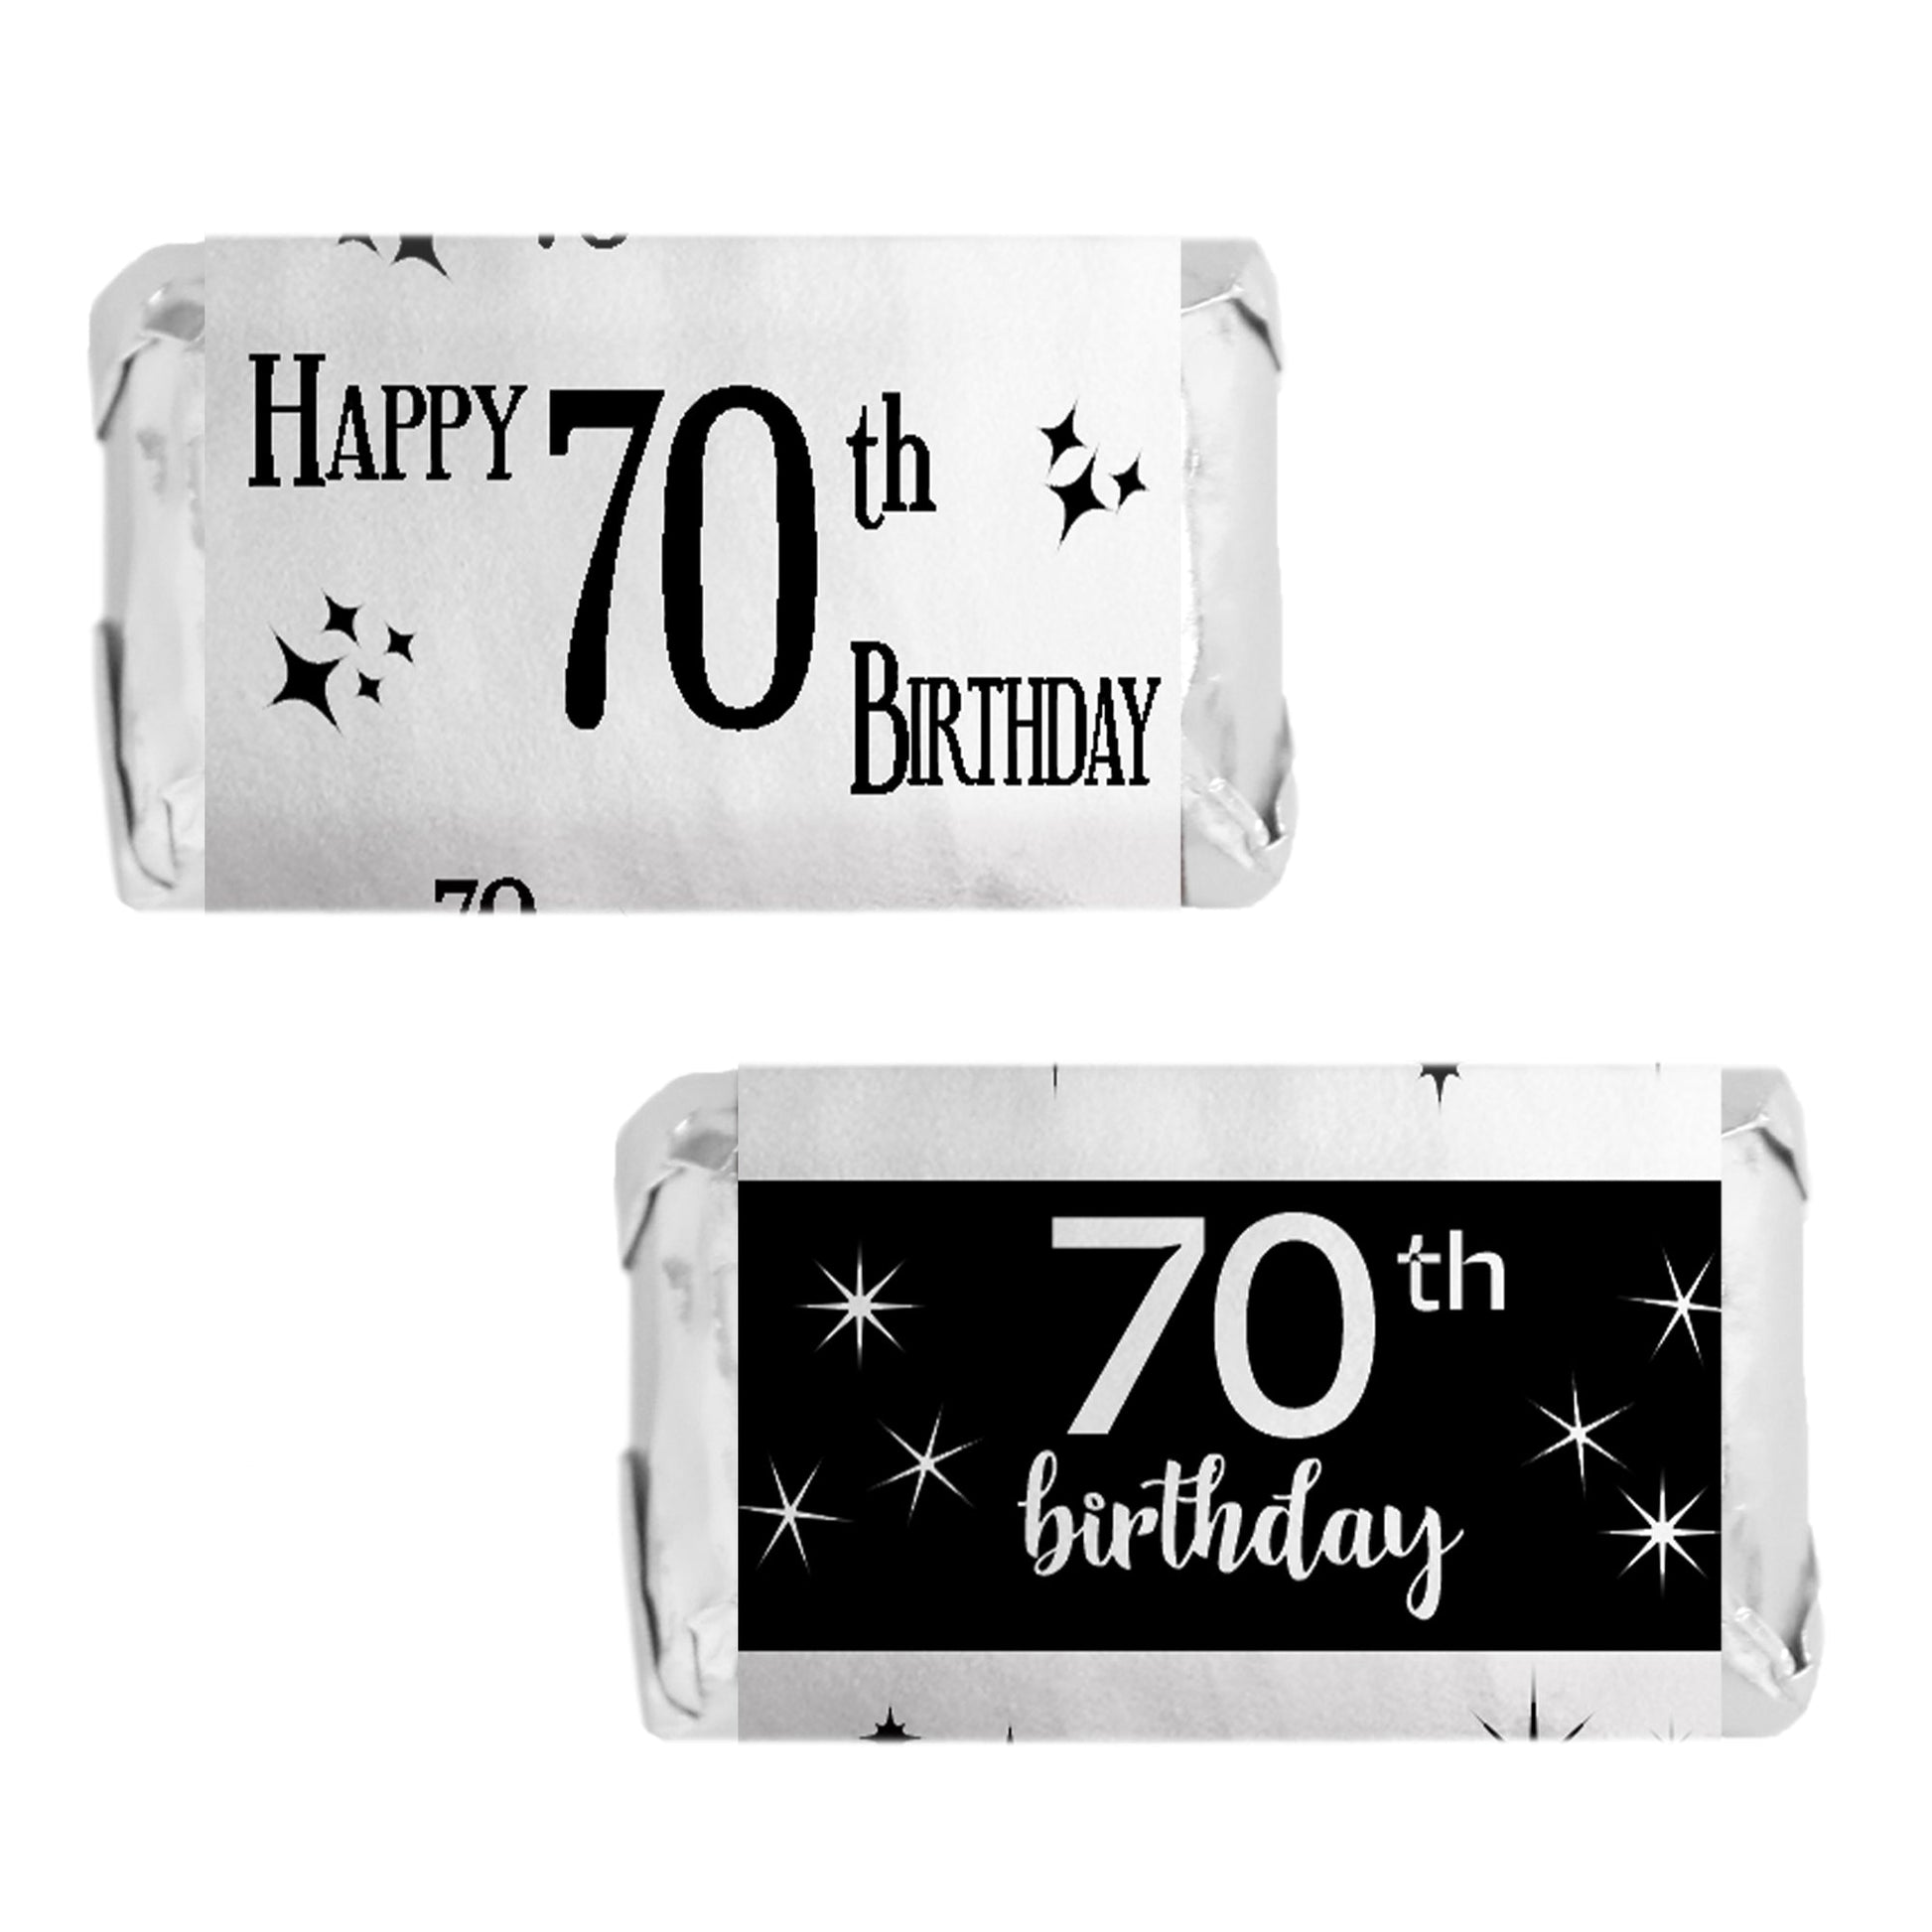 Add sparkle to a loved one's 70th birthday with these Black and Silver Shiny Foil Mini Candy Bar Stickers.